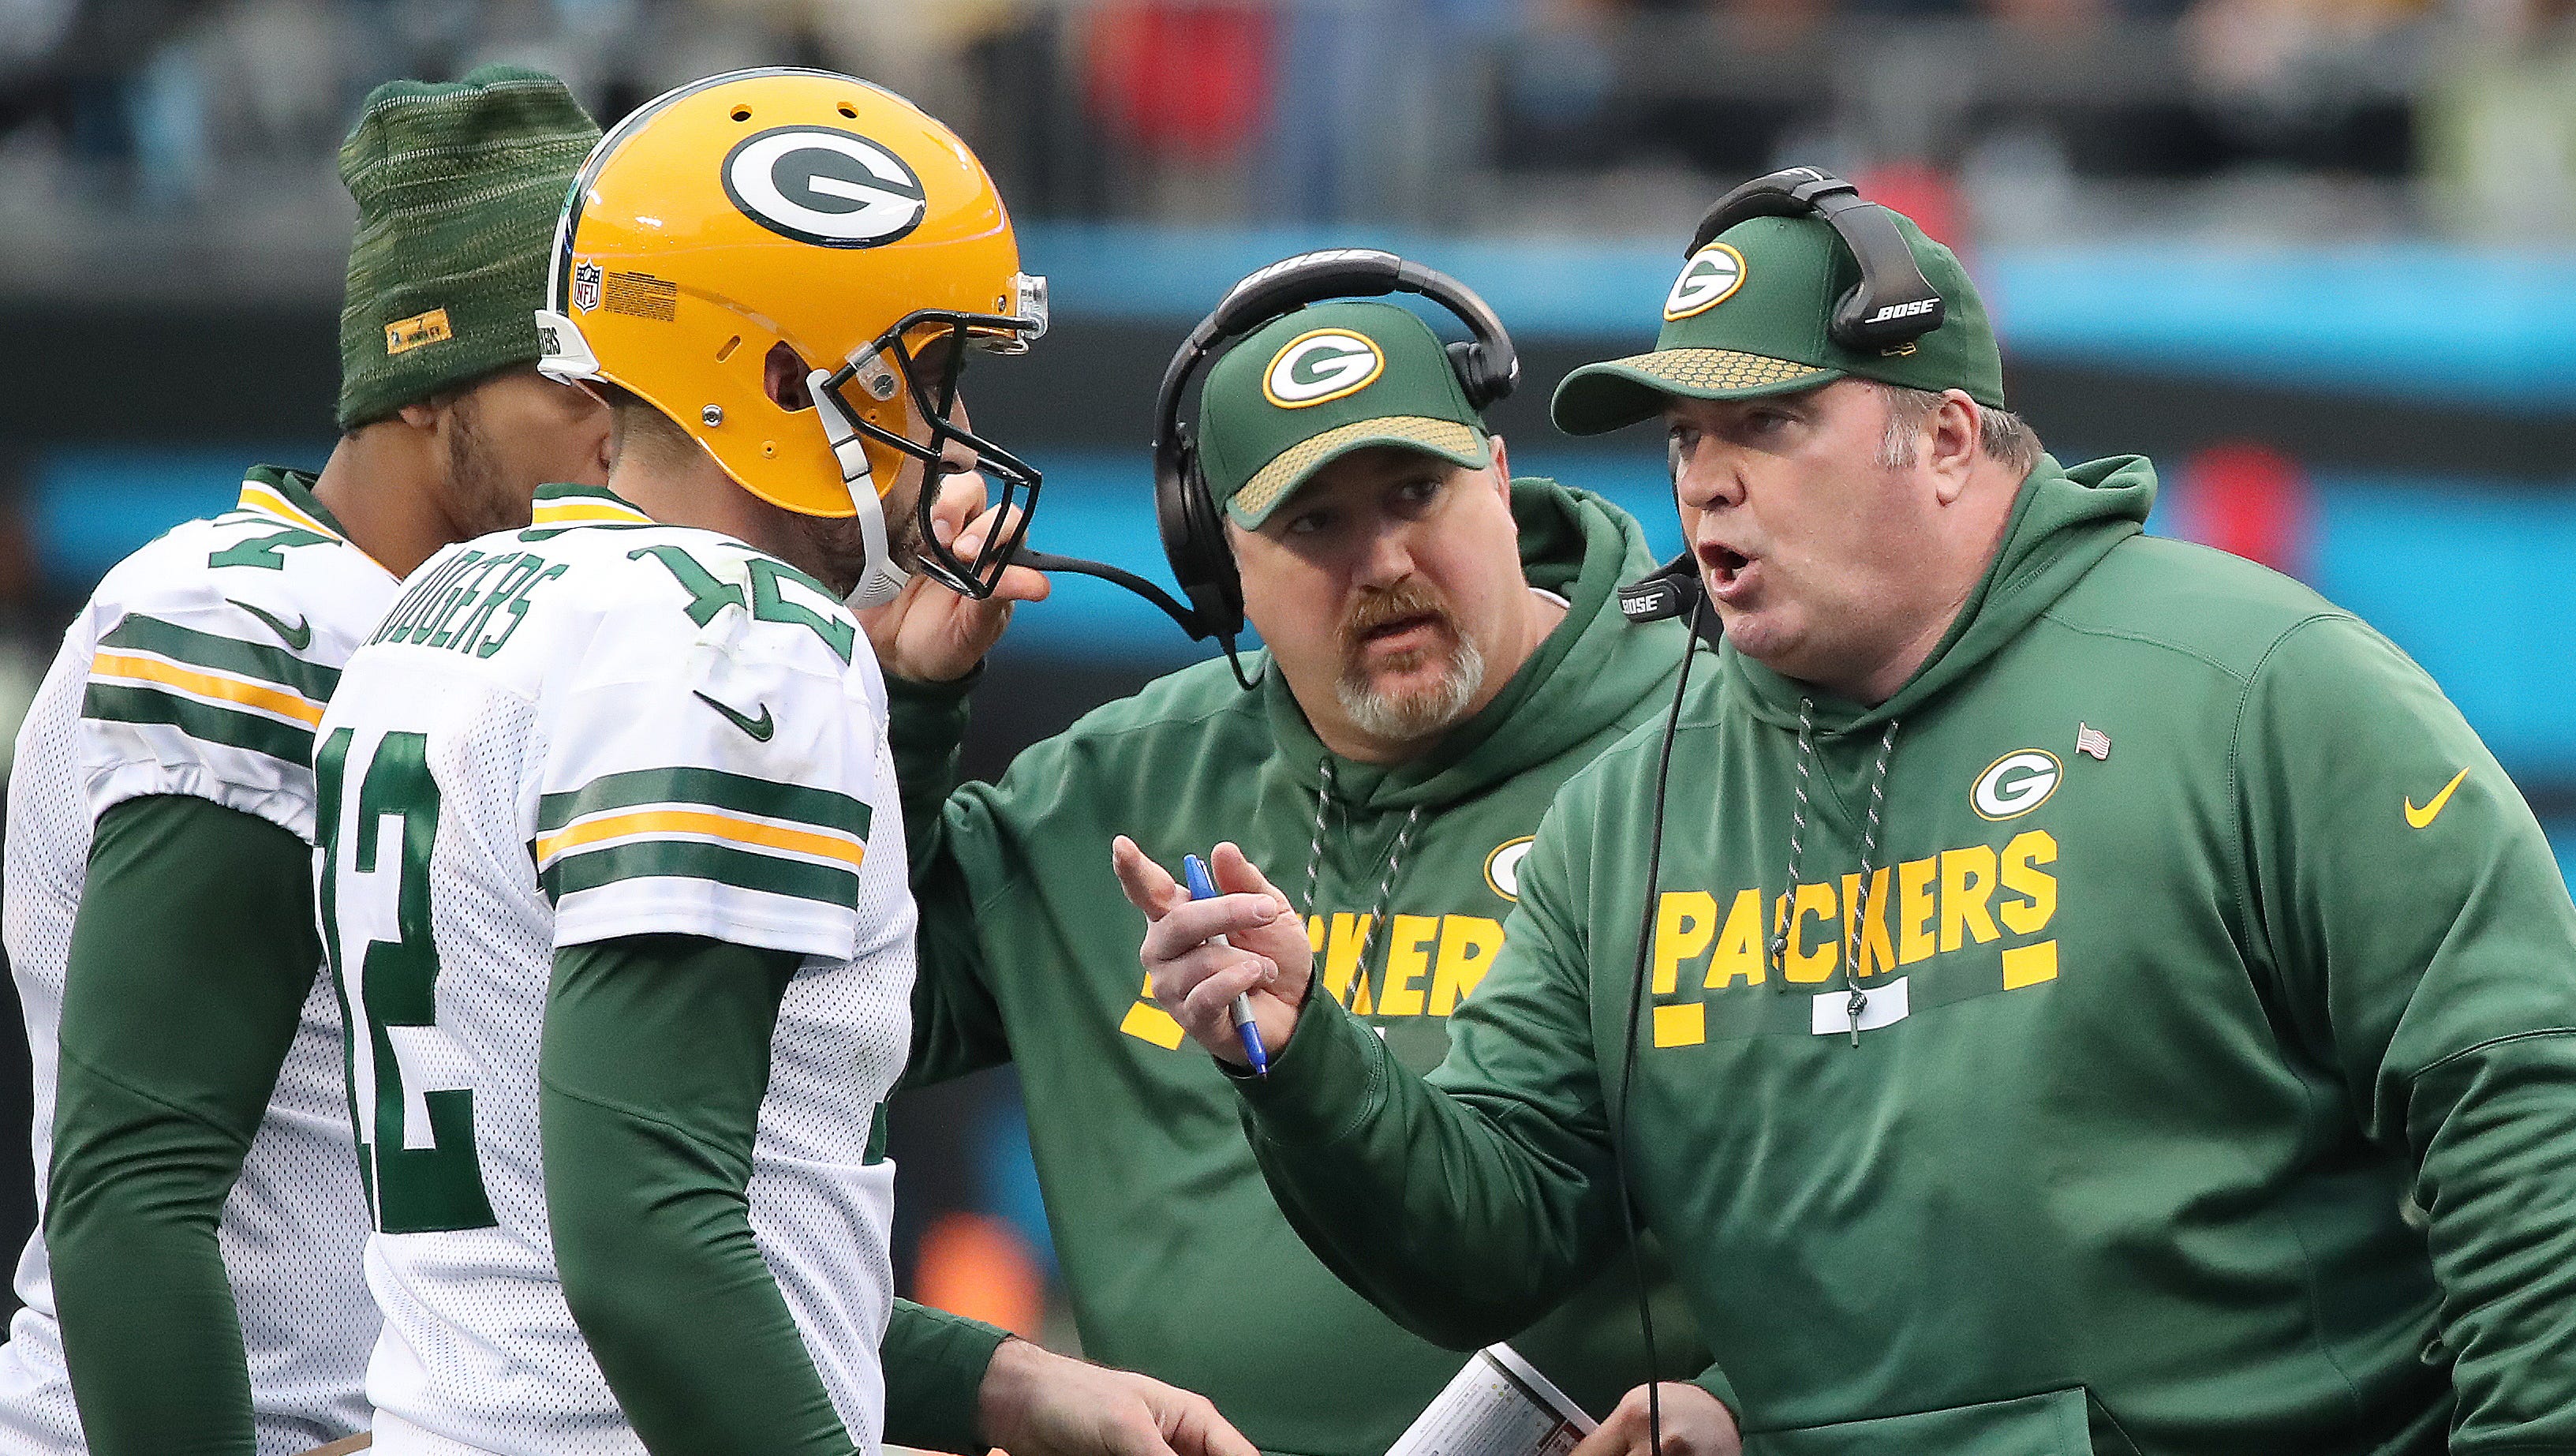 Green Bay Packers quarterback Aaron Rodgers (12) and coach Mike McCarthy talk during a timeout against the Carolina Panthers on Dec. 17, 2017, at Bank of America Stadium in Charlotte, N.C.